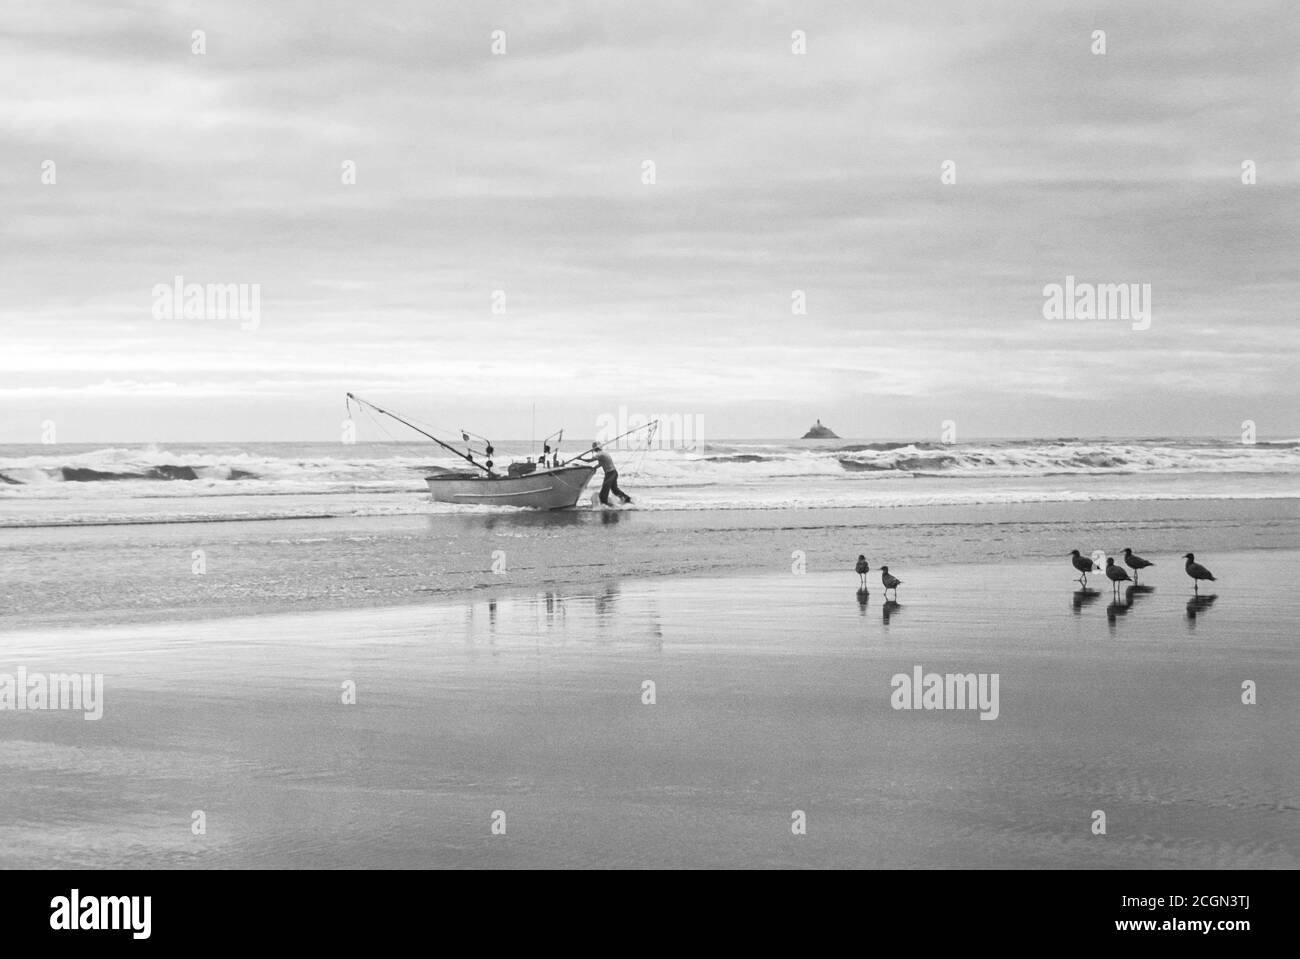 Man launching fishing dory into Pacific Ocean surf from beach at Cannon Beach, Oregon USA Stock Photo